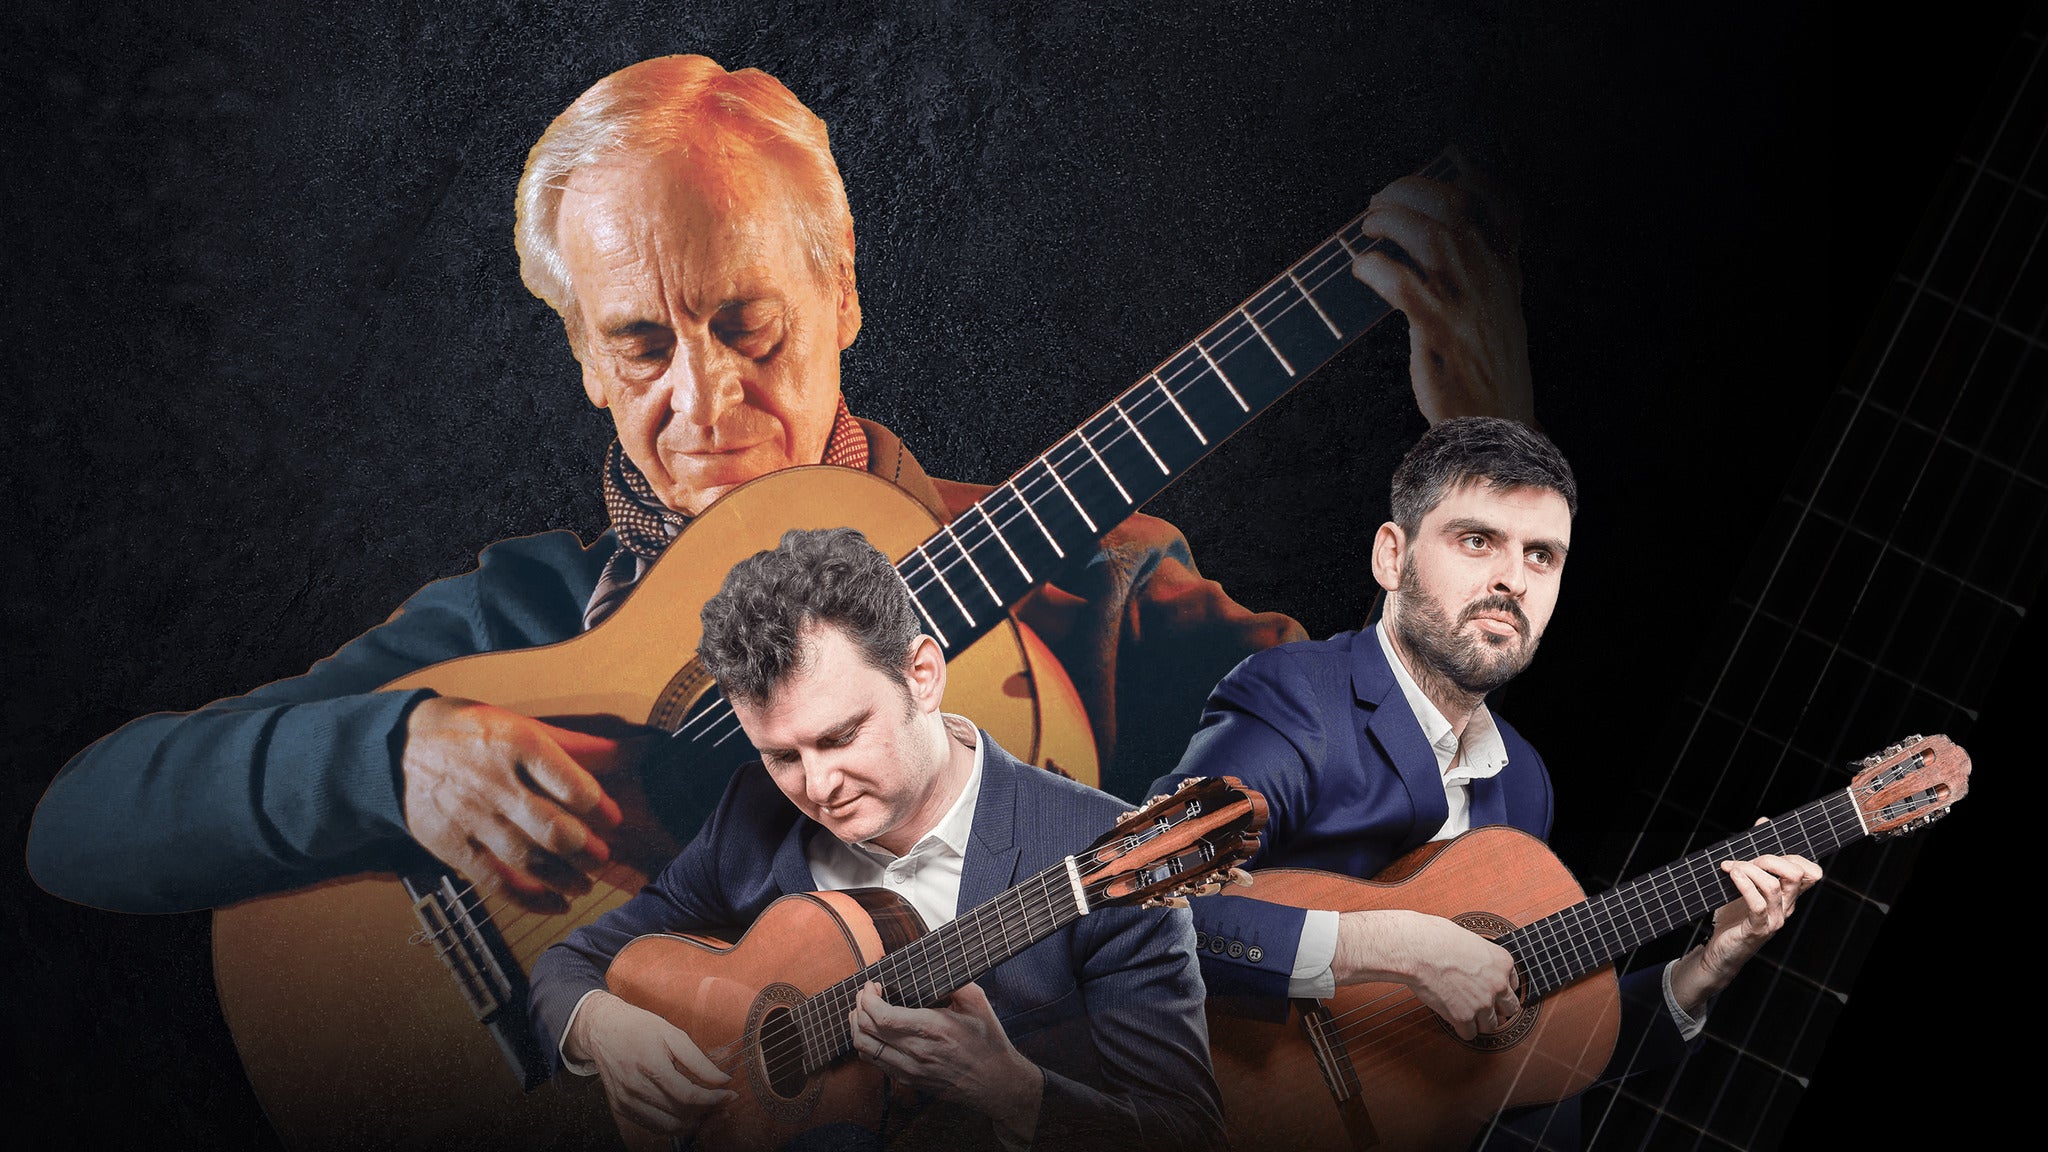 Image used with permission from Ticketmaster | Paco Pena Flamenco In Concert tickets